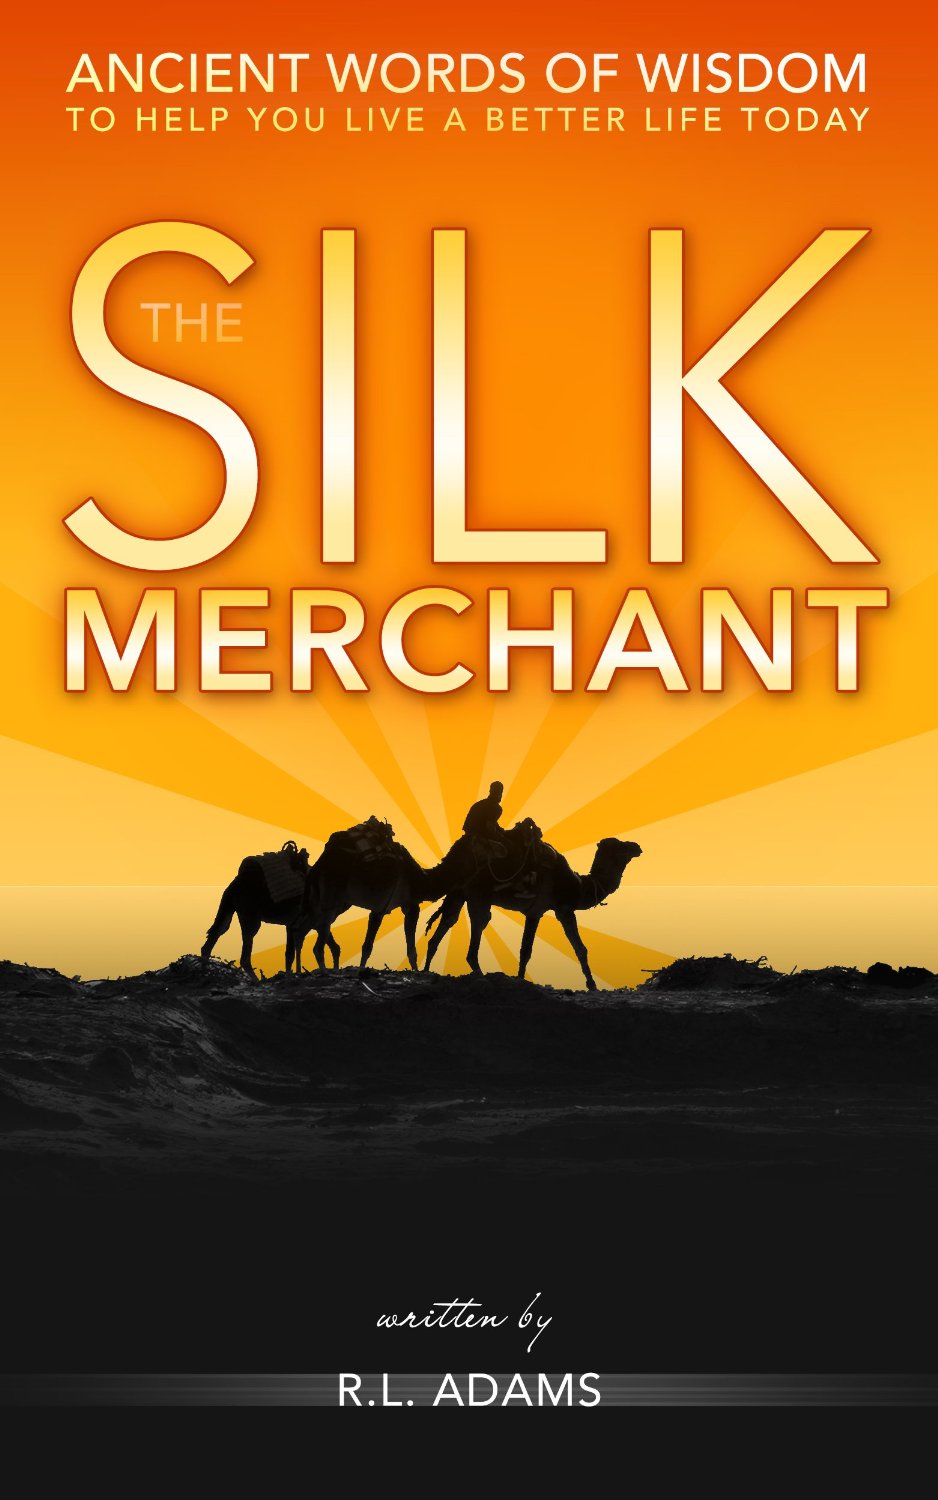 The Silk Merchant – Ancient Words of Wisdom to Help you Live a Better Life Today by R.L. Adams